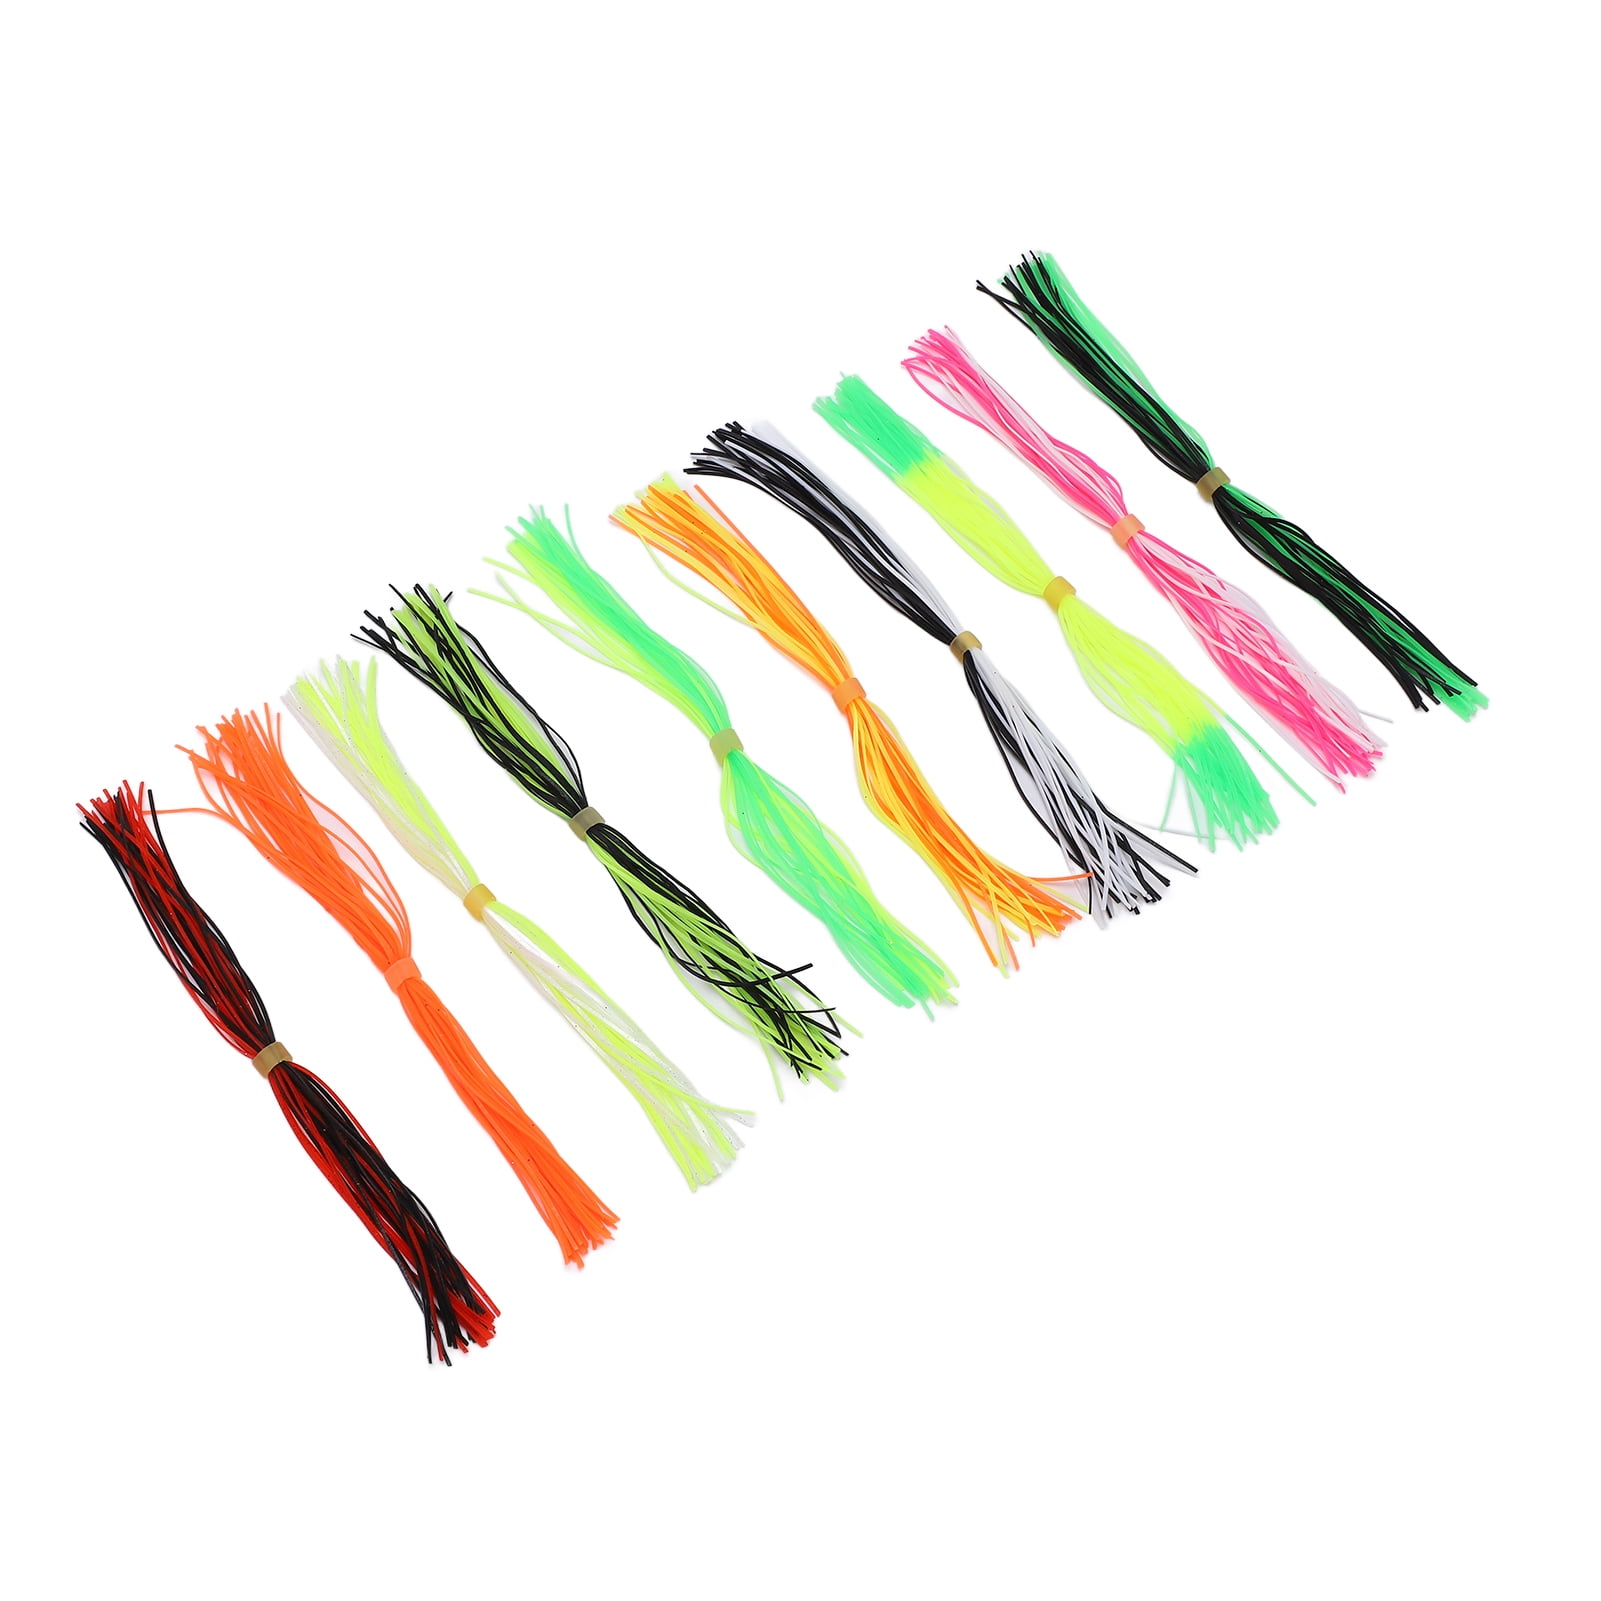 OROOTL Silicone Jig Skirts DIY Rubber Skirt Fishing Bass Jig Lures 50  Strands Fishing Lure Skirt Replacement for Spinnerbaits Bass Buzzbaits  Fishing